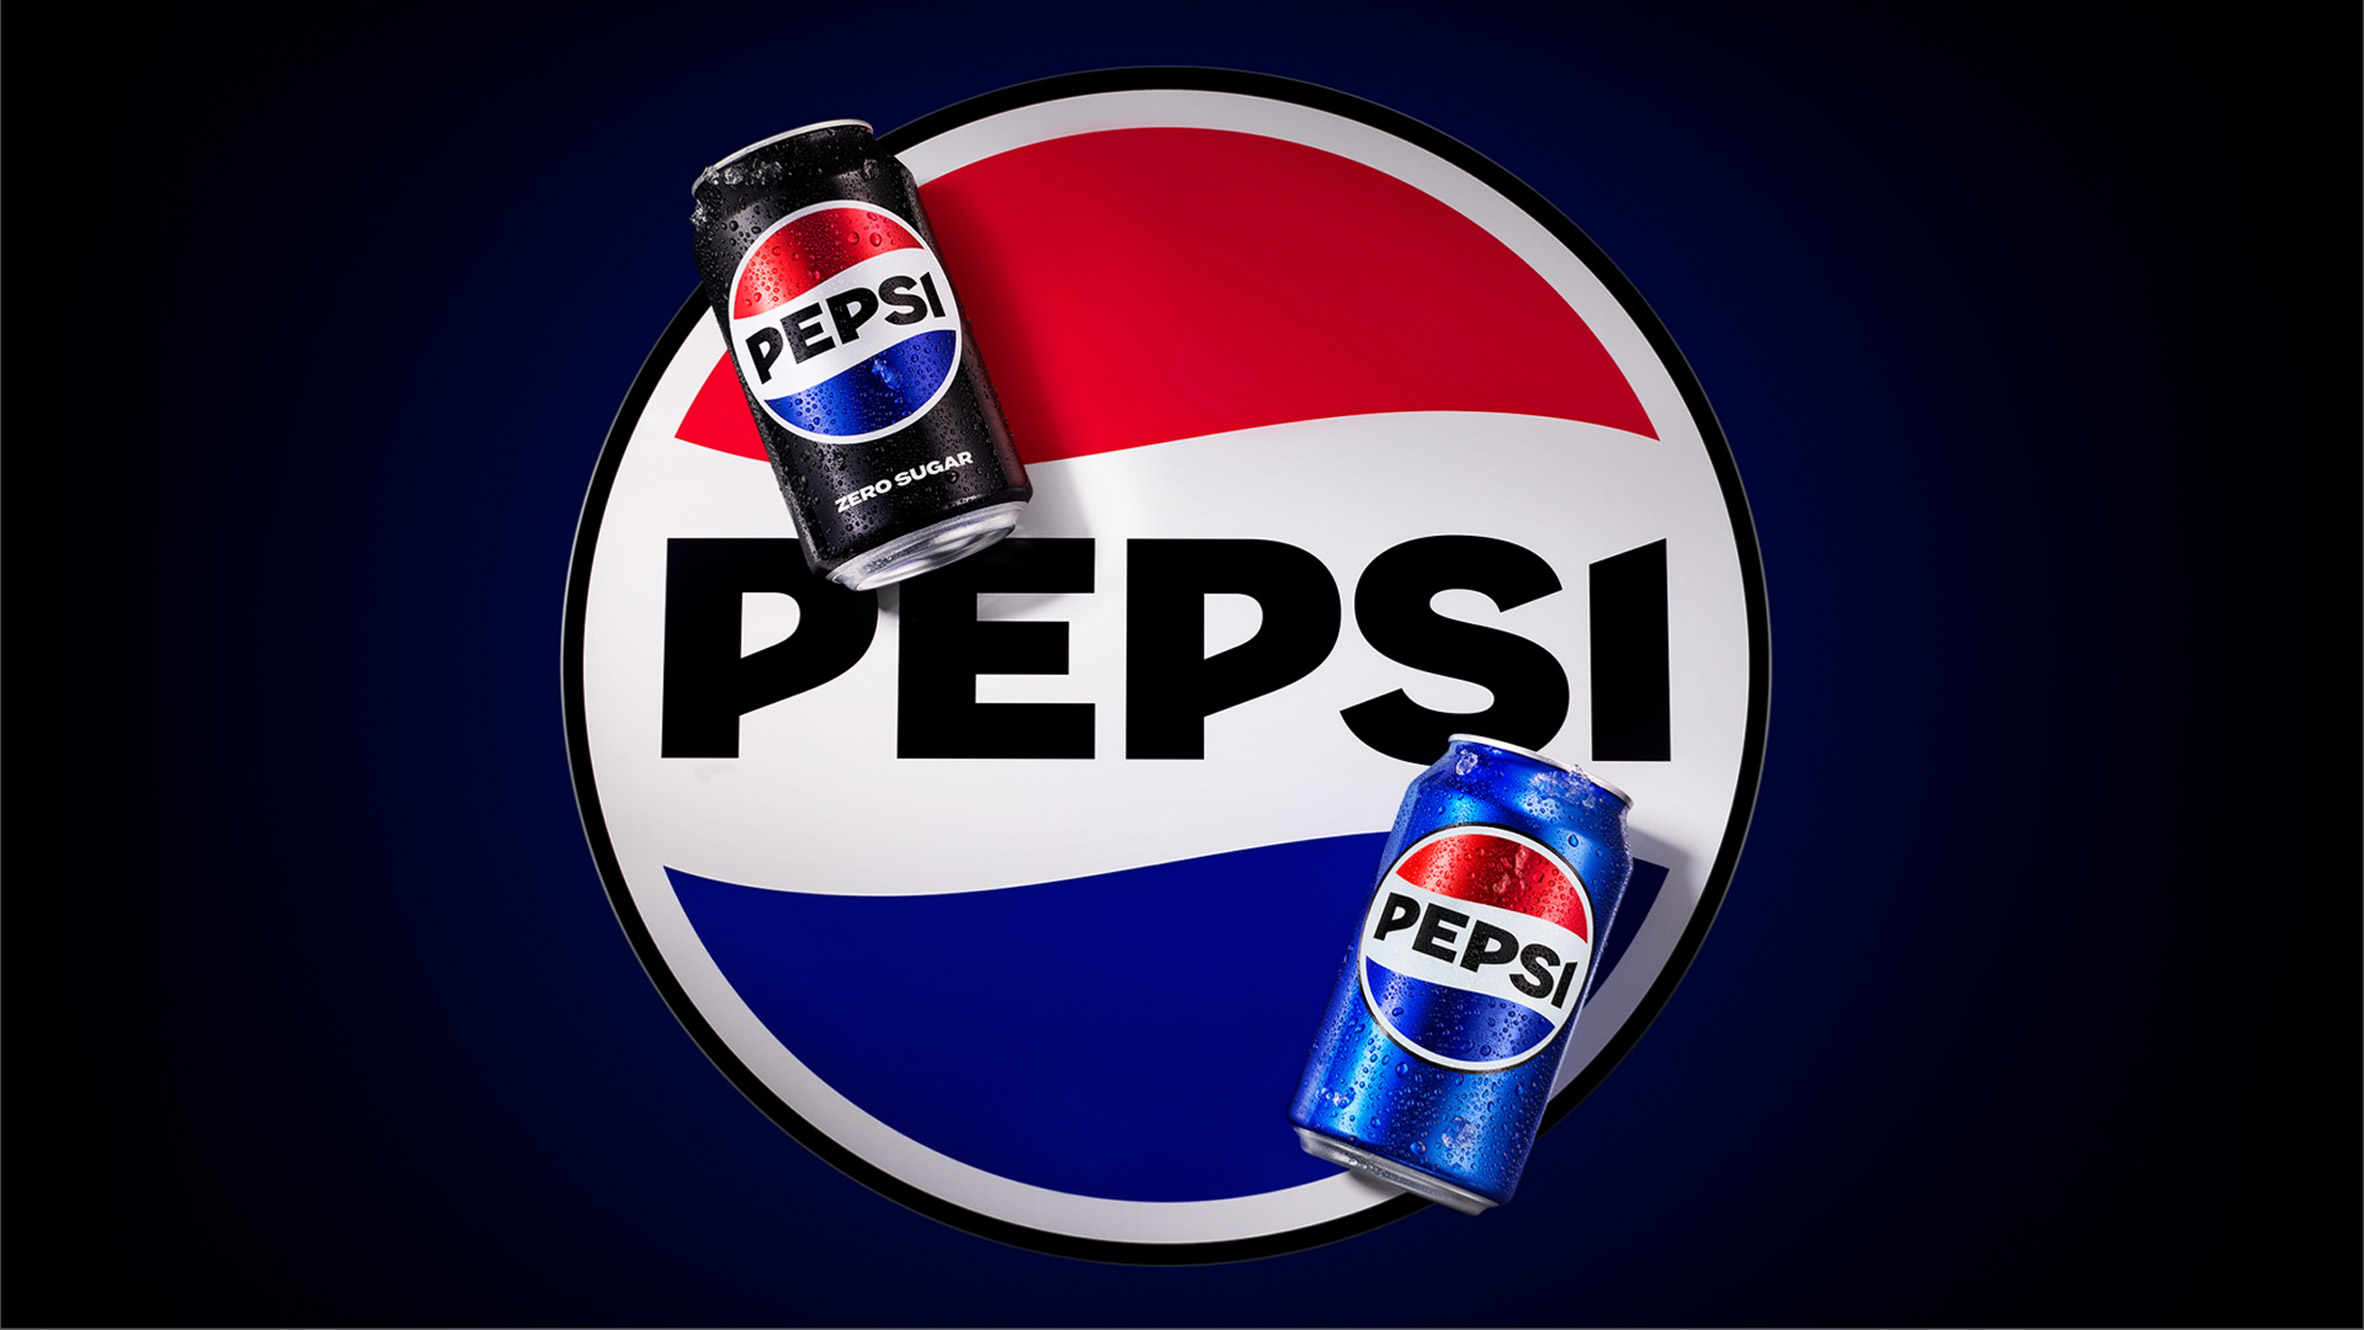 We tried the revamped Pepsi Zero Sugar; Here's what we thought